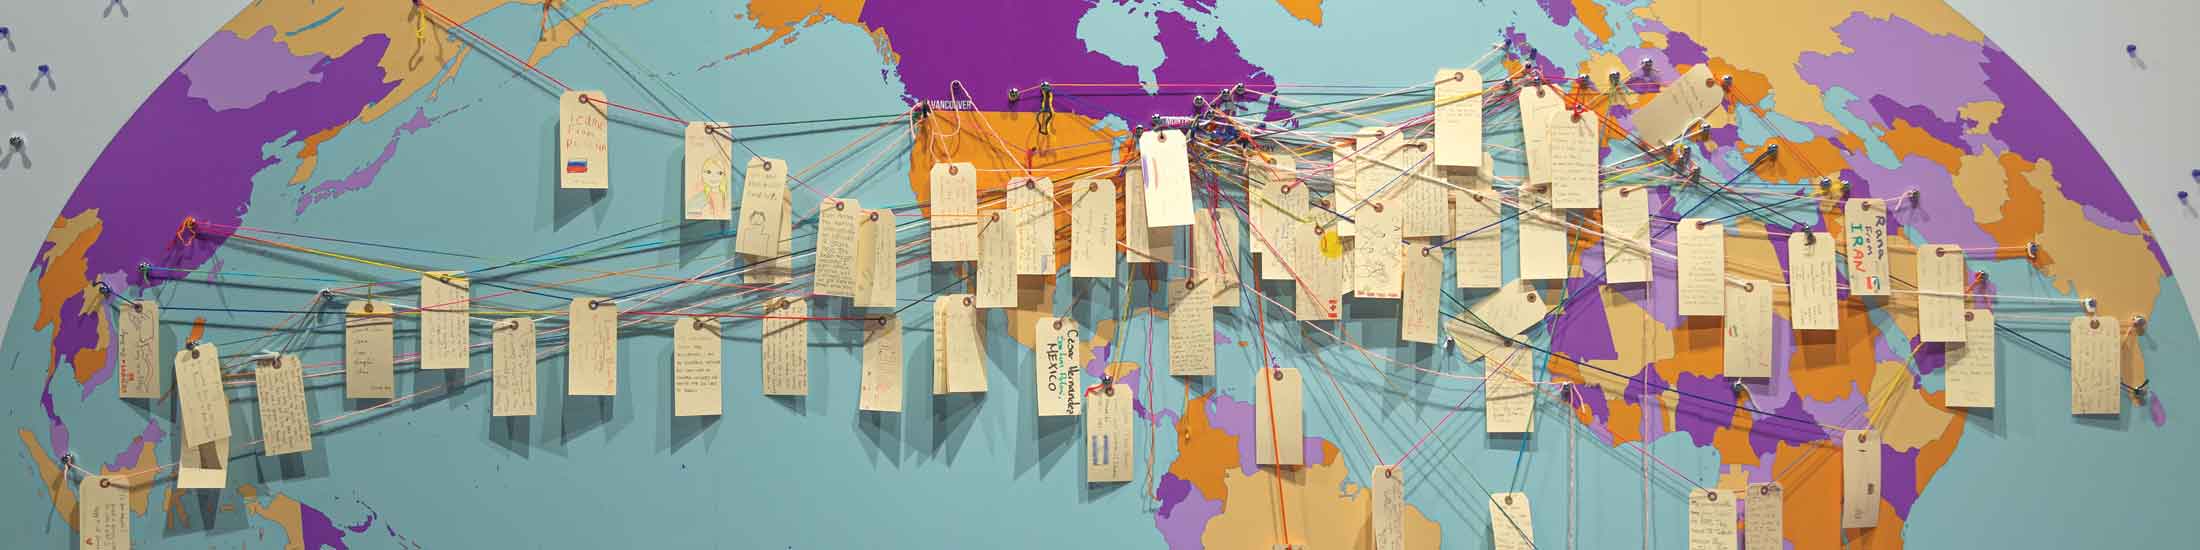 Luggage tags with visitors notes are attached with string on a large map of the world.